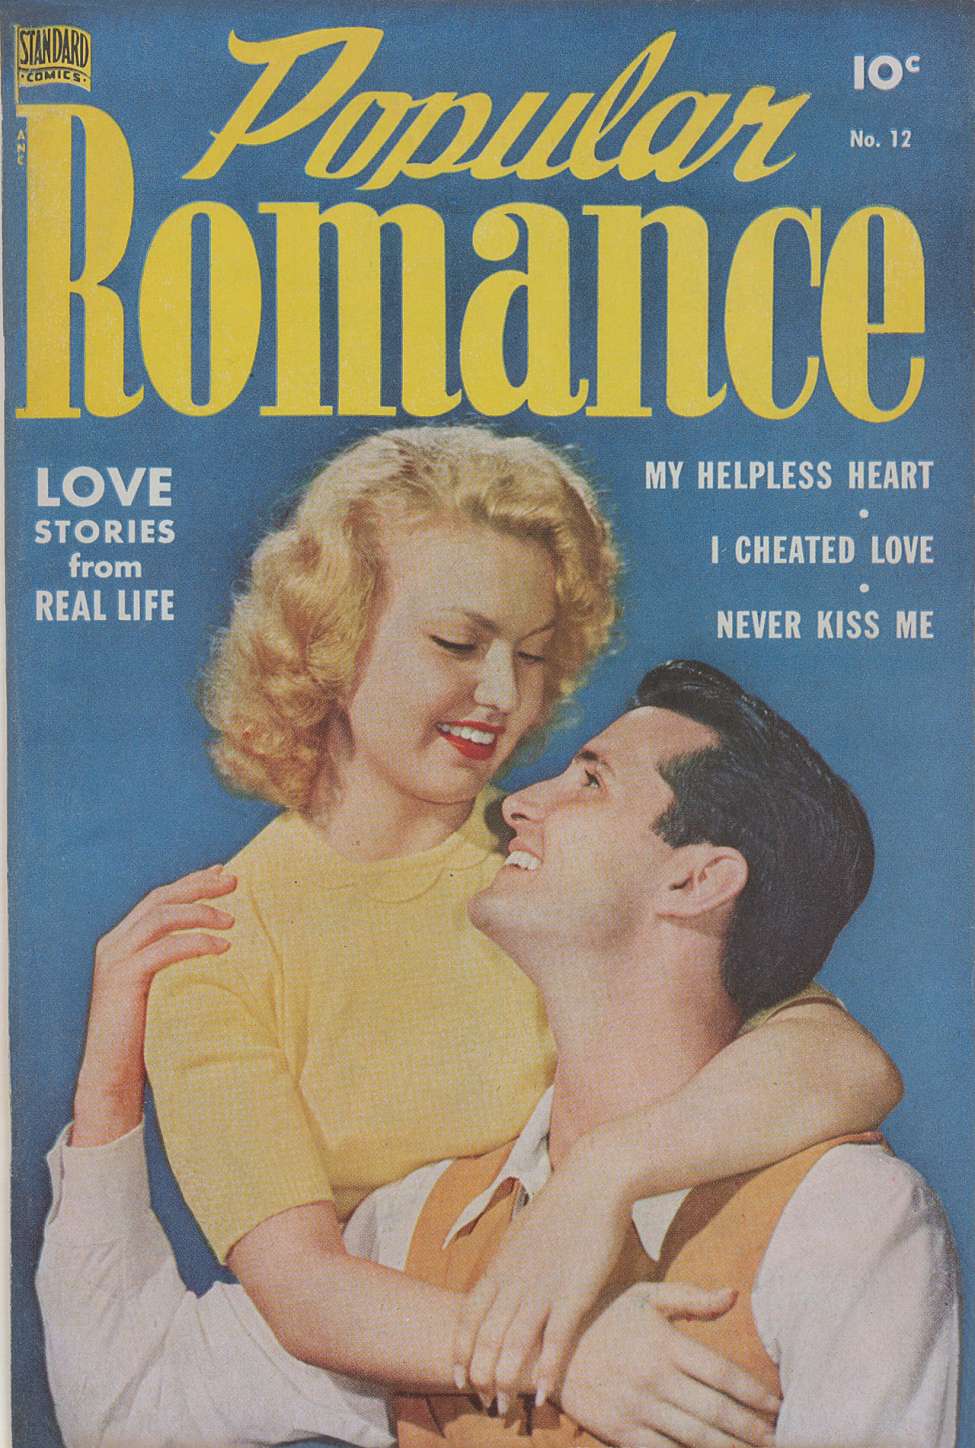 Book Cover For Popular Romance 12